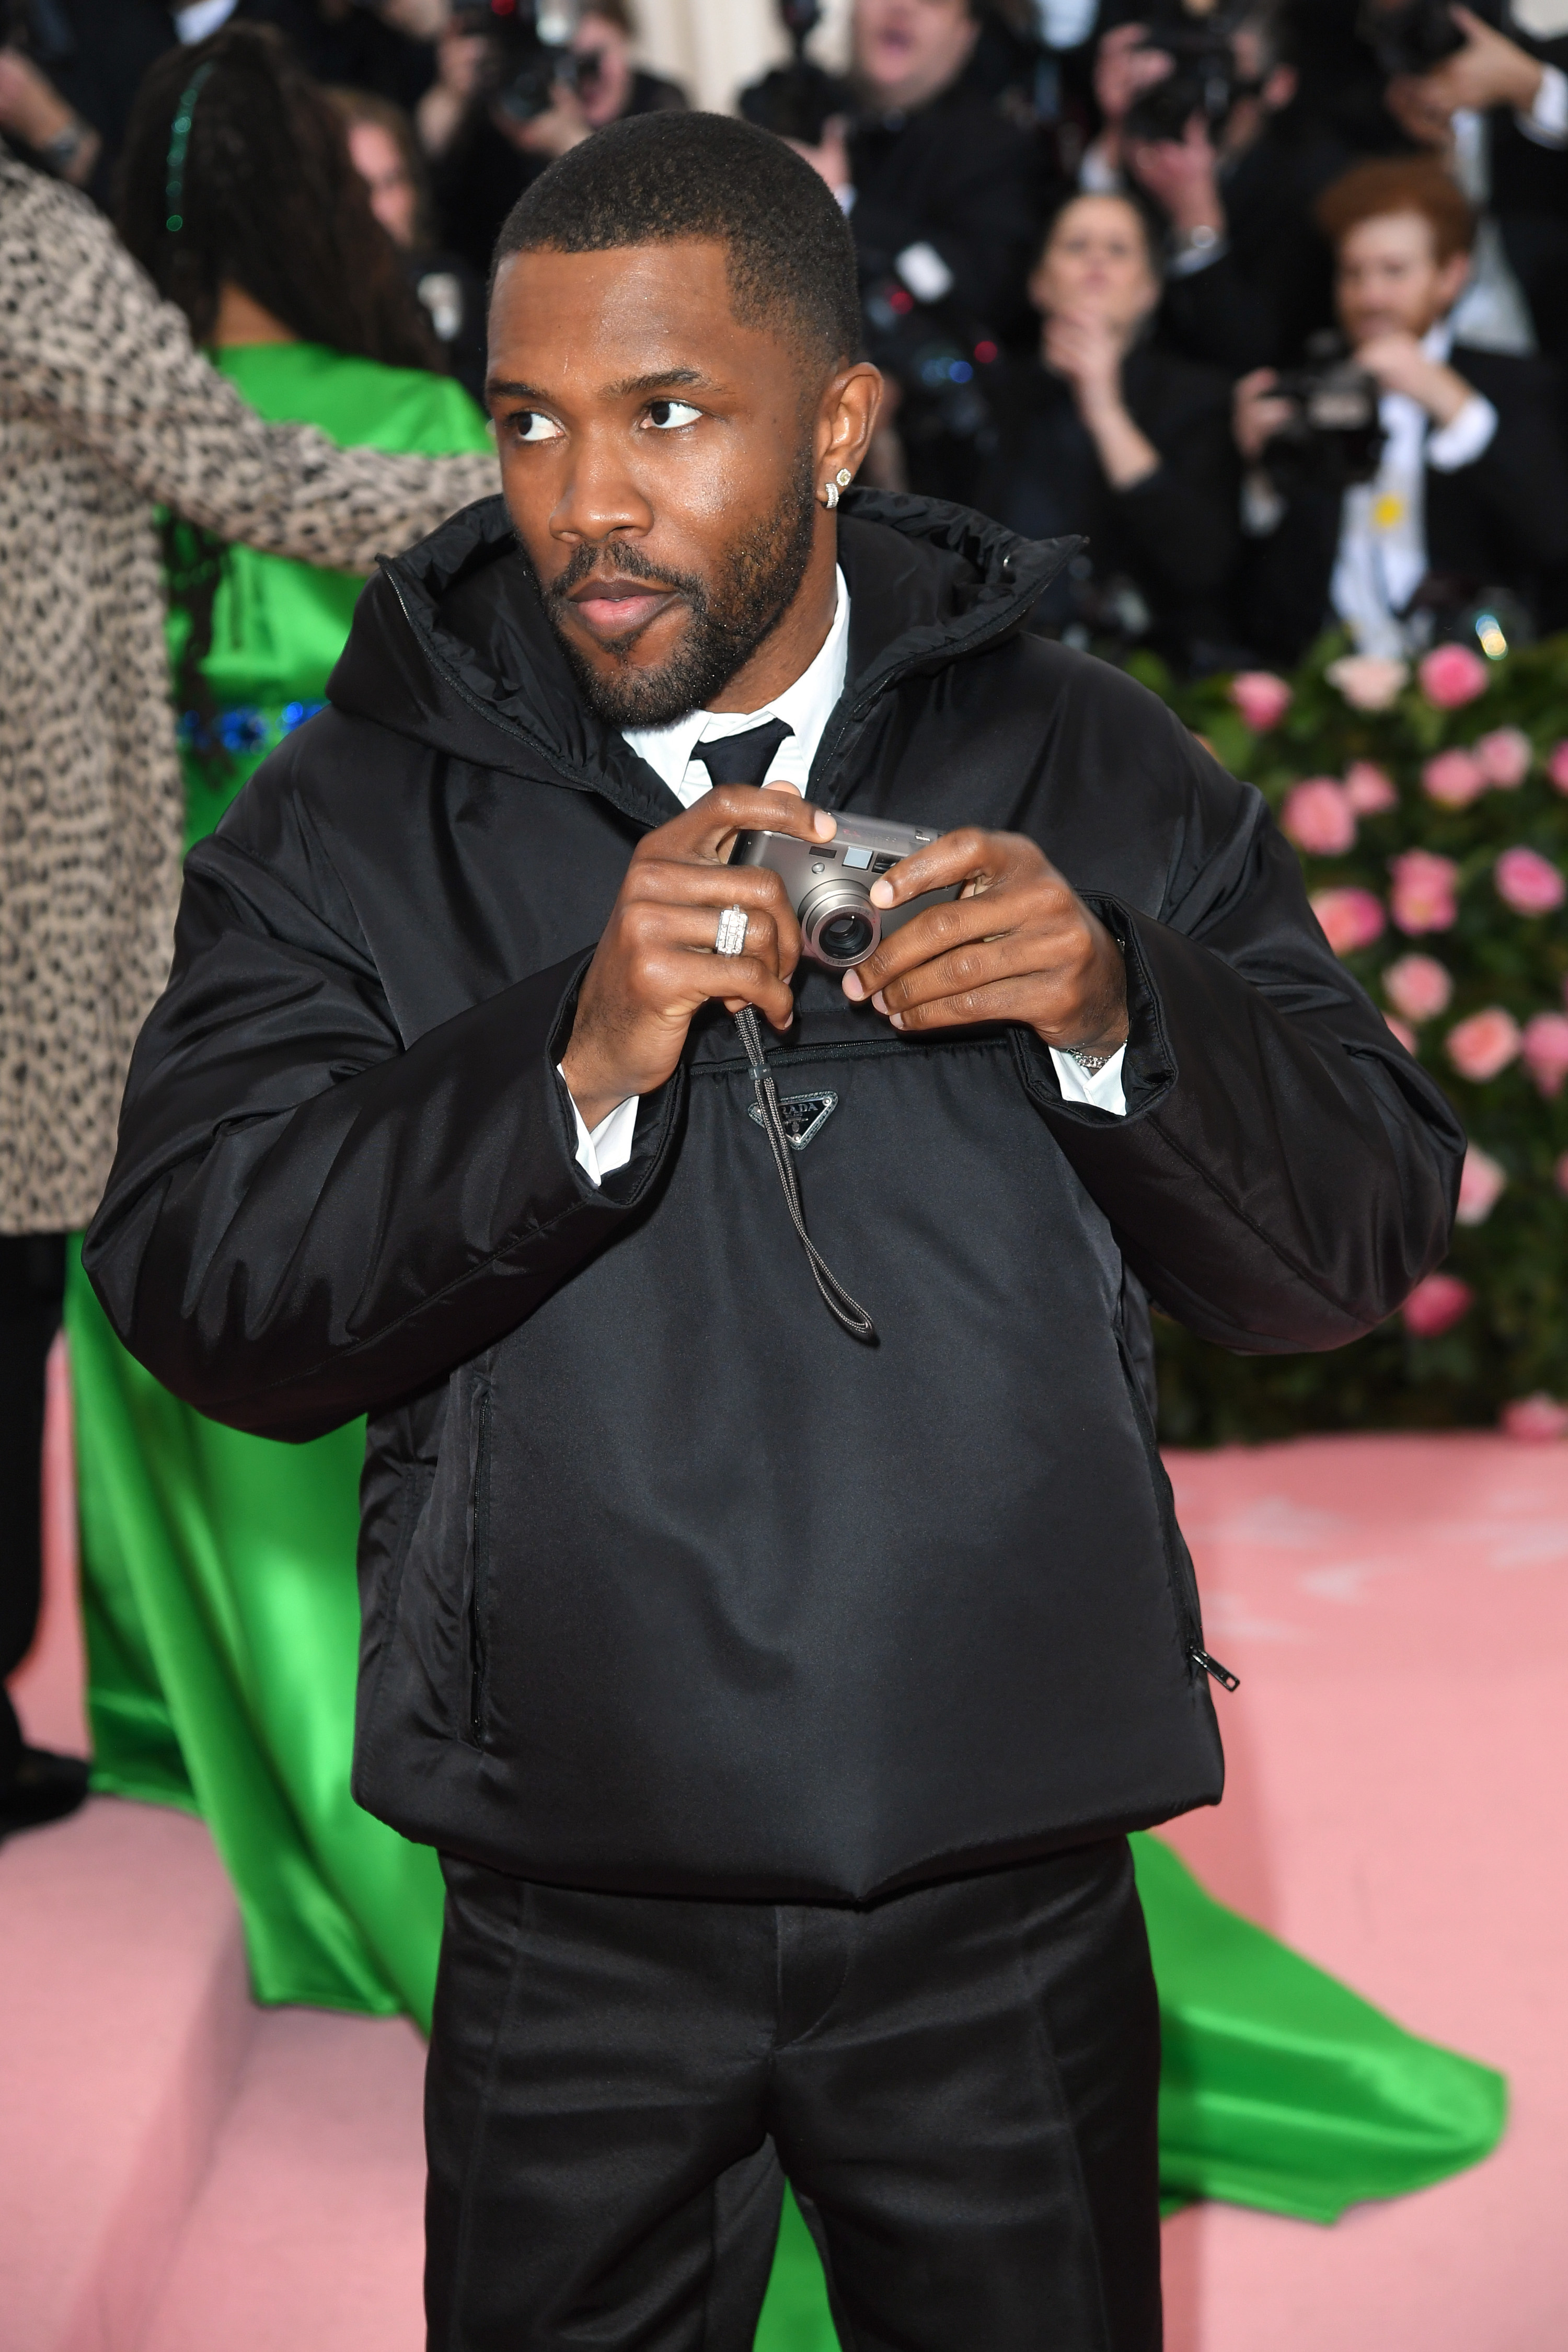 Frank Ocean on the Met Gala red carpet, wearing a black suit and Prada jacket and holding a film camera